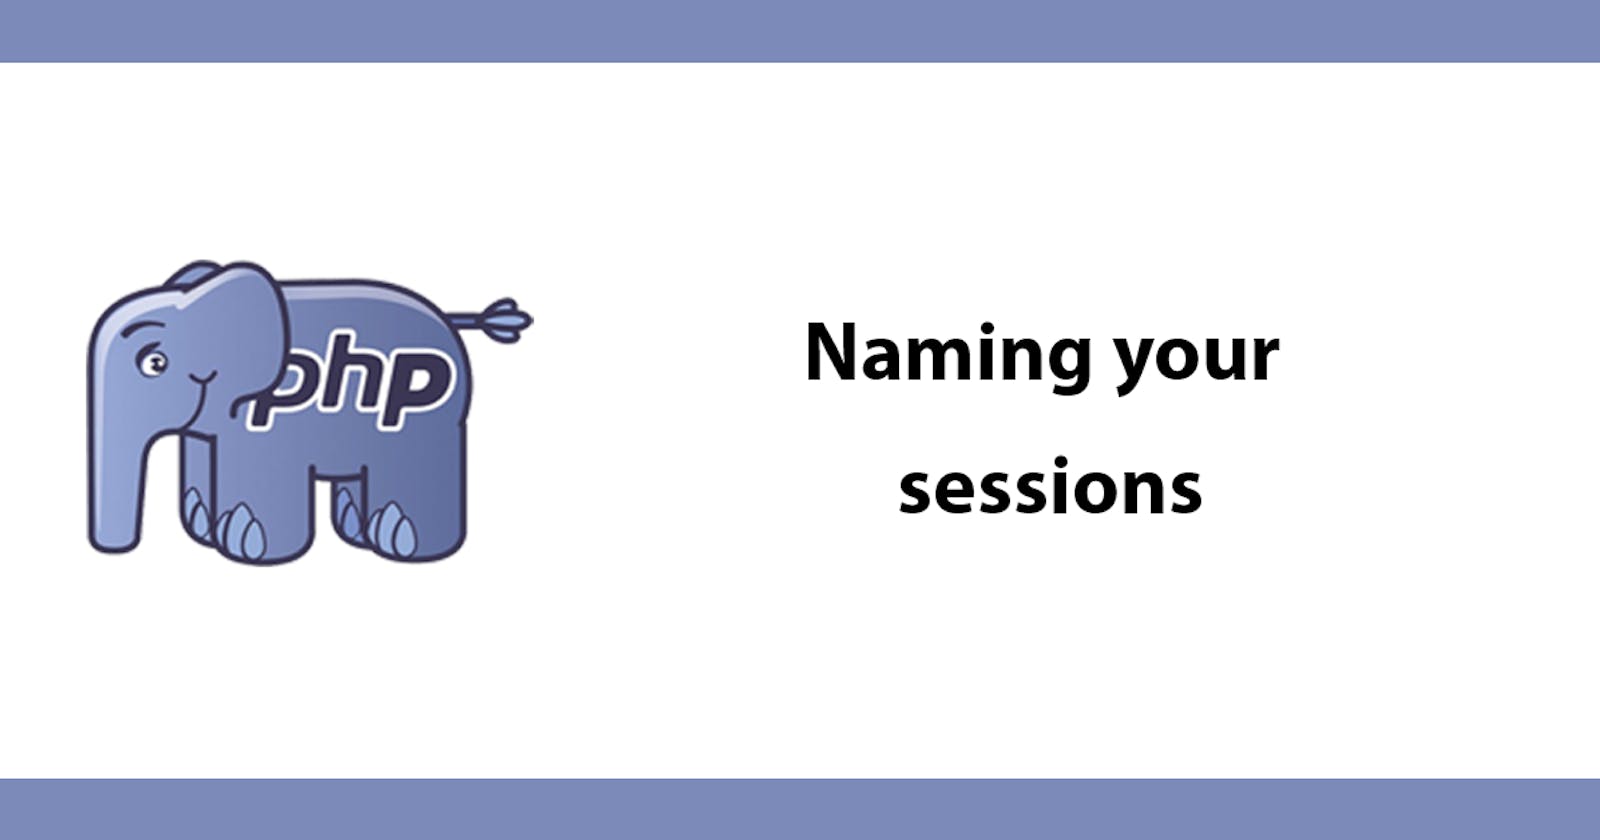 Naming your sessions